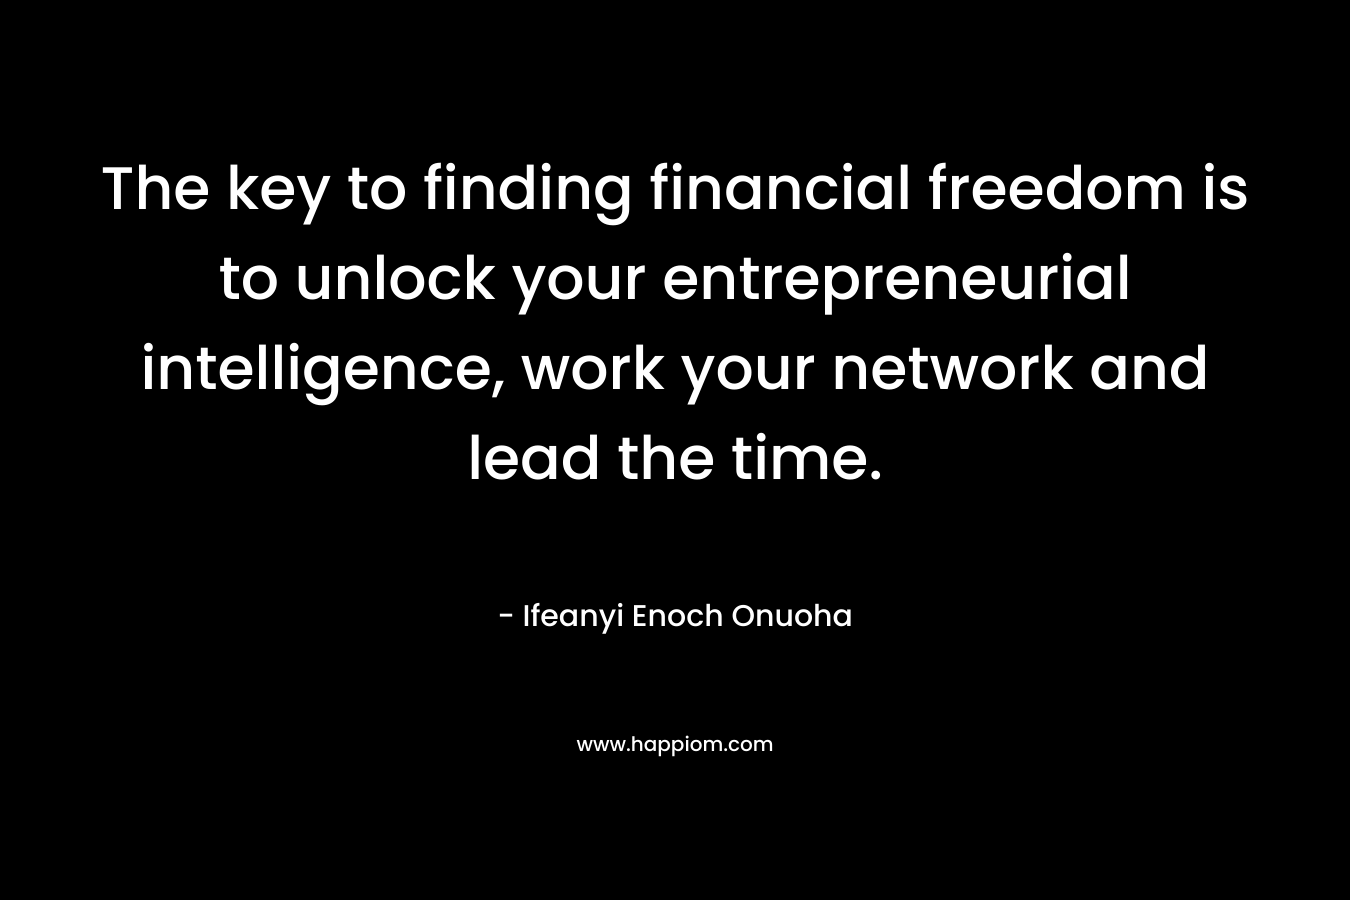 The key to finding financial freedom is to unlock your entrepreneurial intelligence, work your network and lead the time. – Ifeanyi Enoch Onuoha